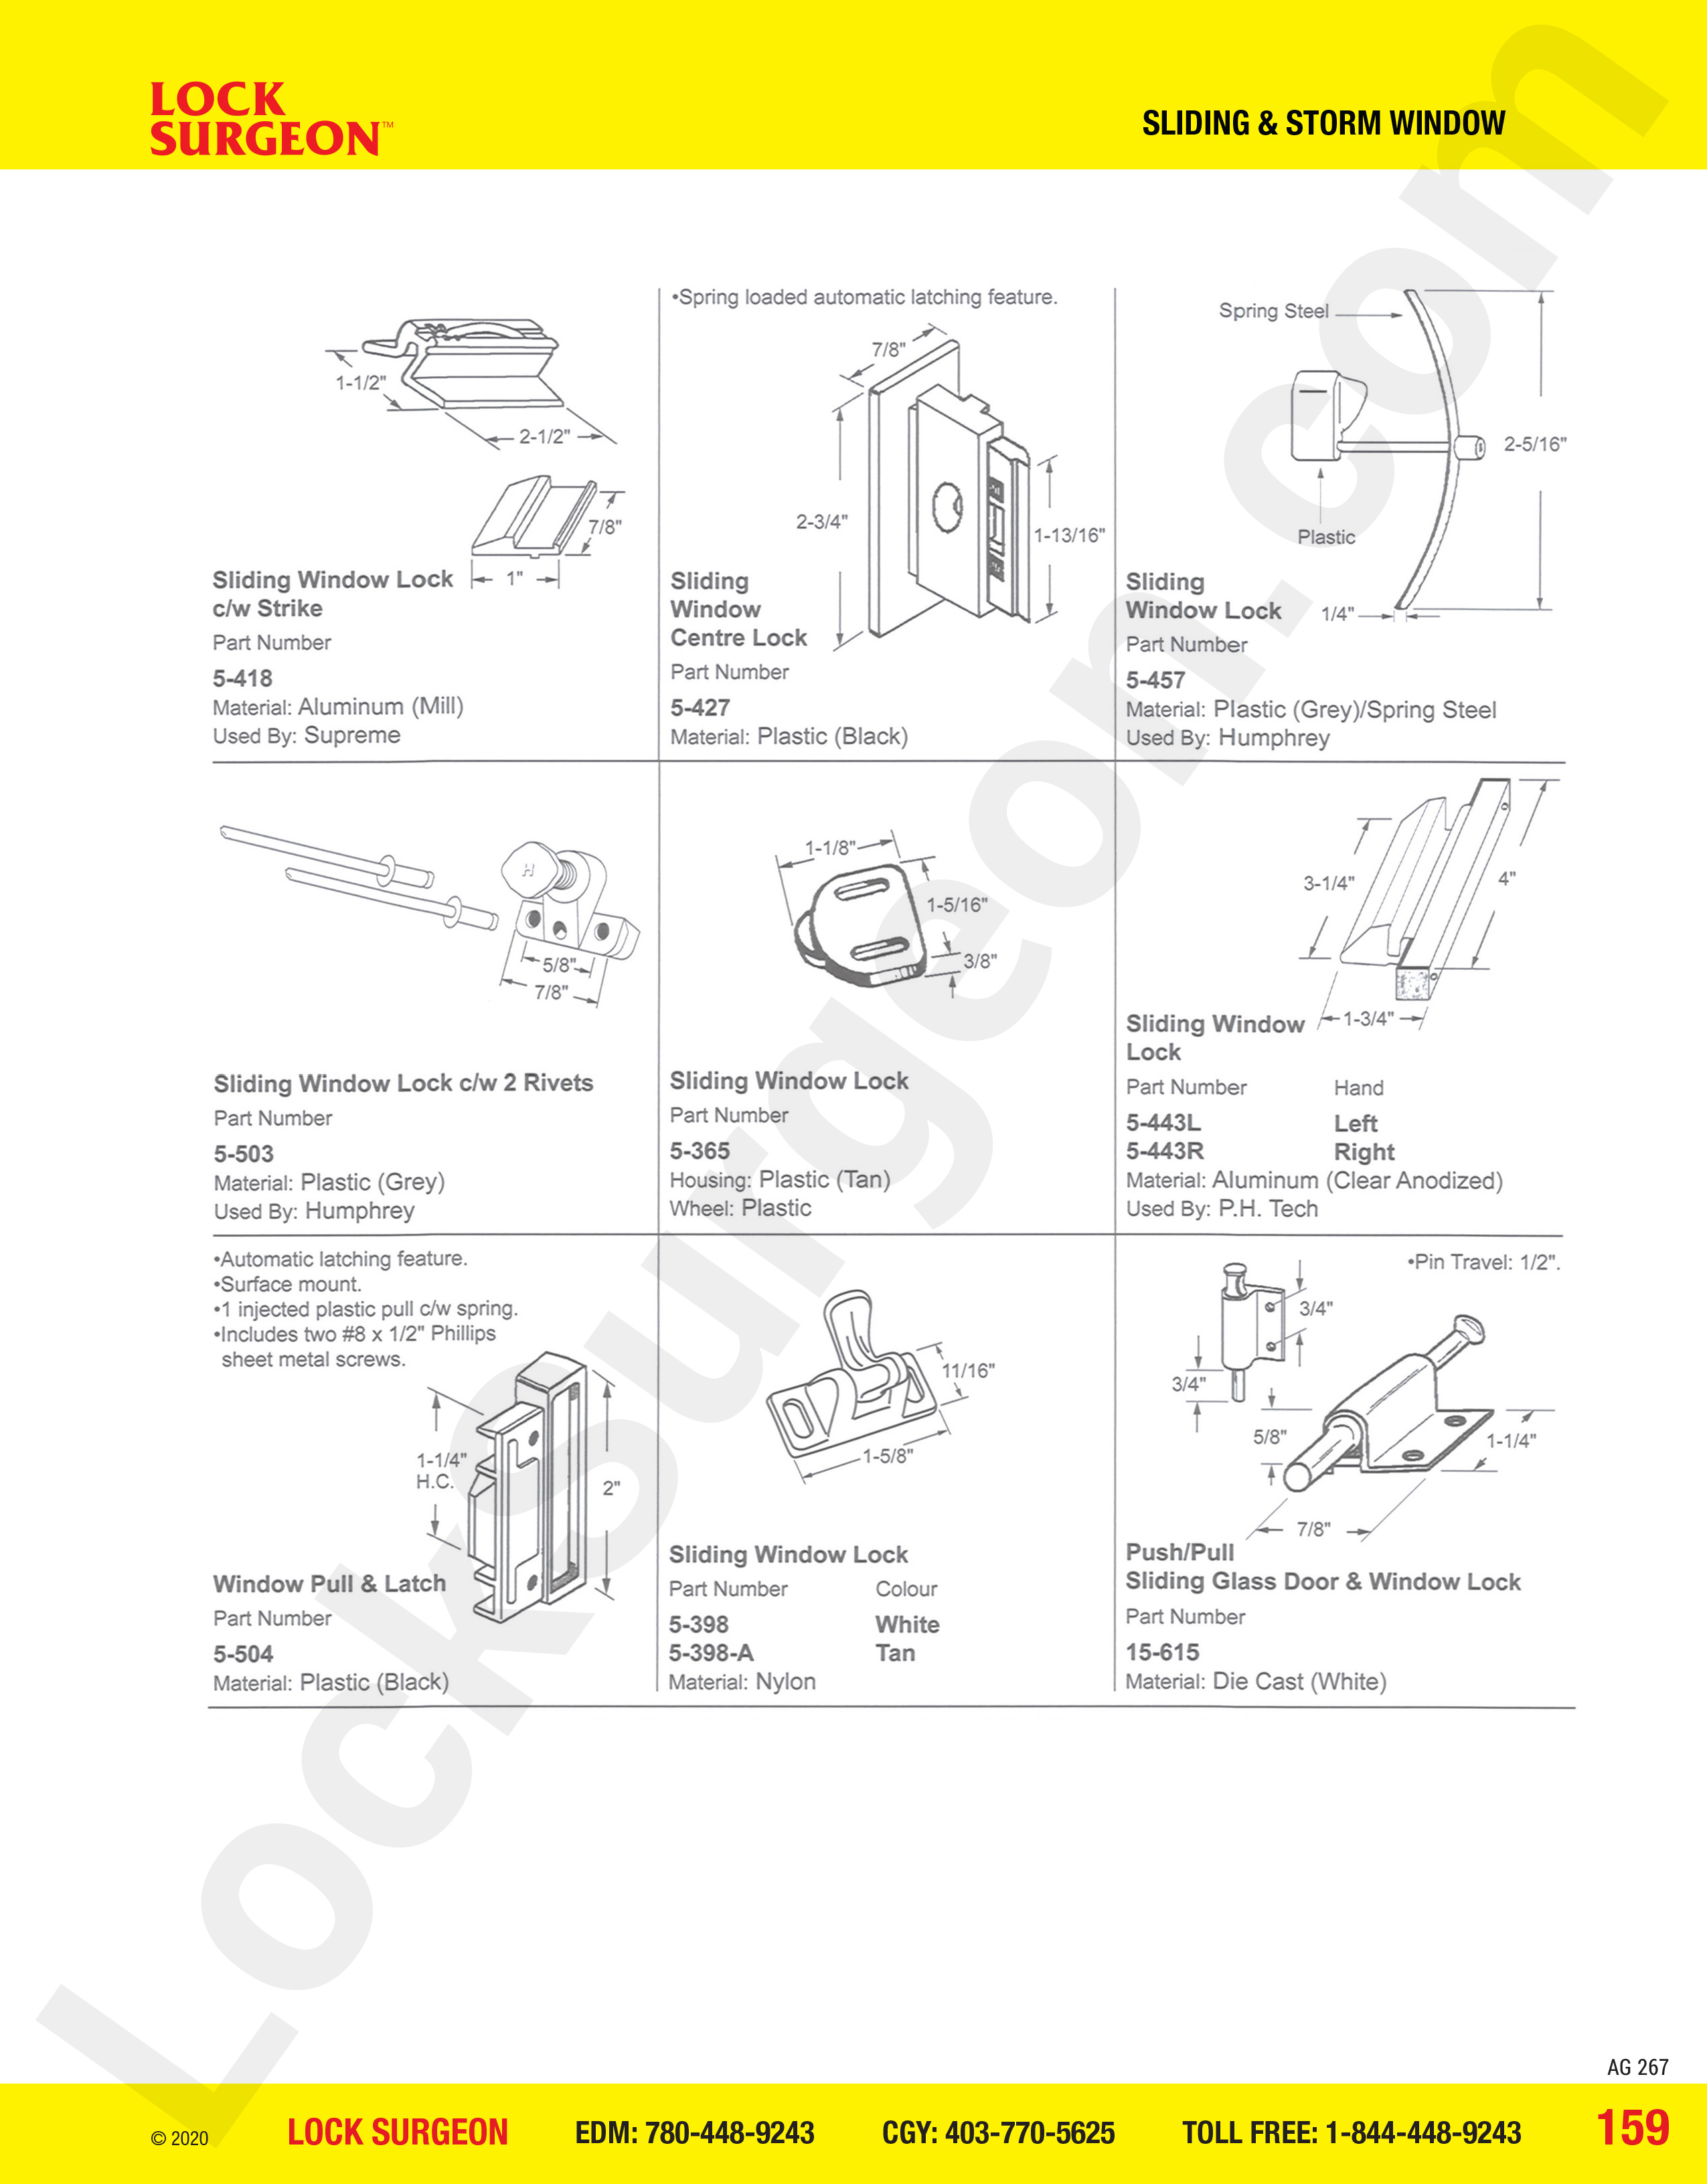 Sliding and Storm Window locks, pulls and latches